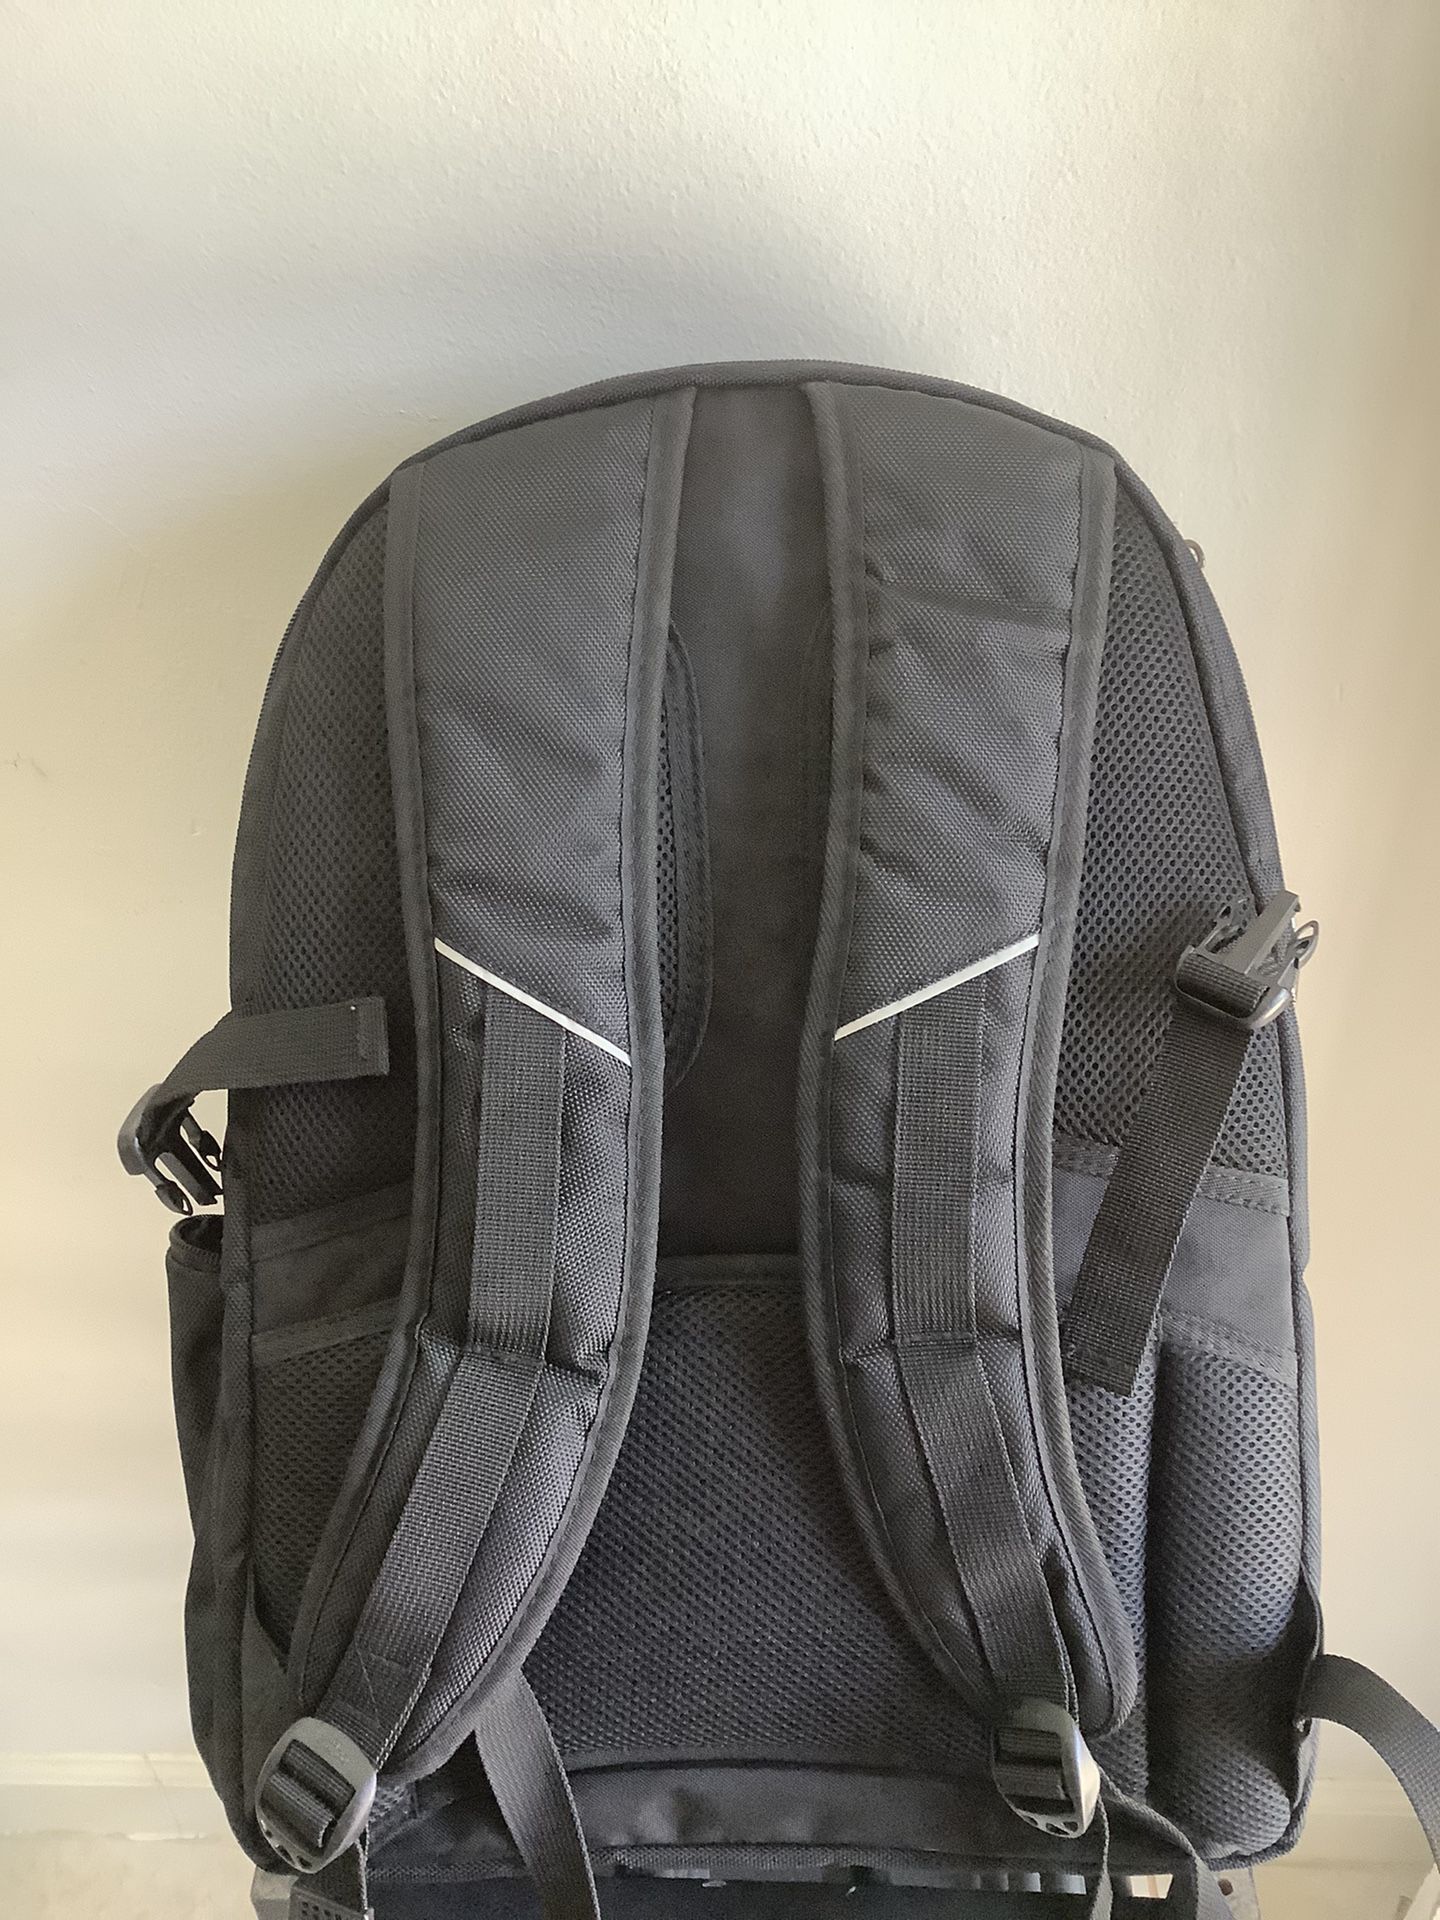 Kenneth Cole laptop backpack